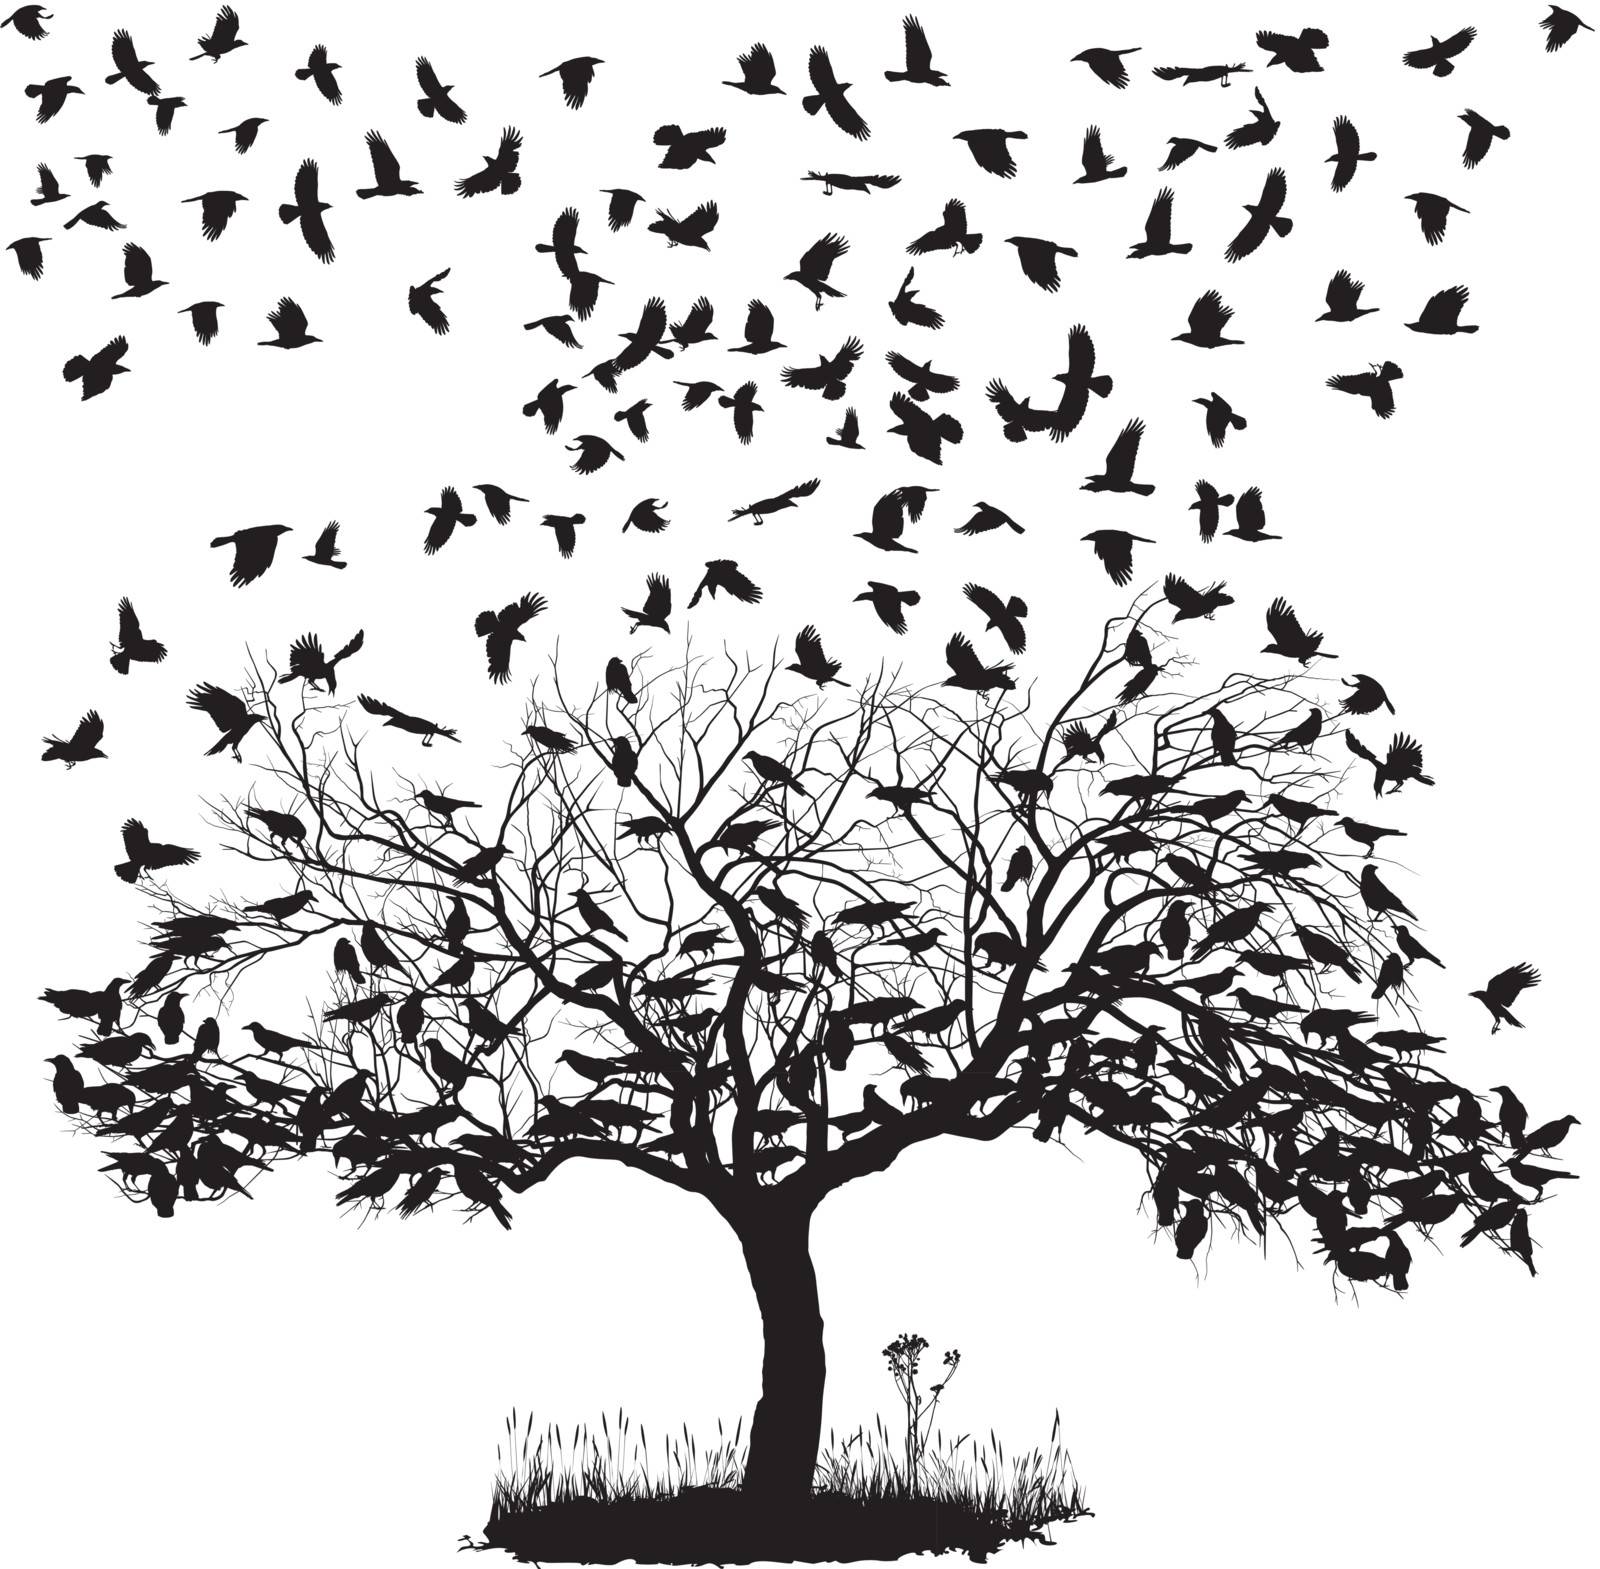 vector illustration of the crows on the tree and in the air